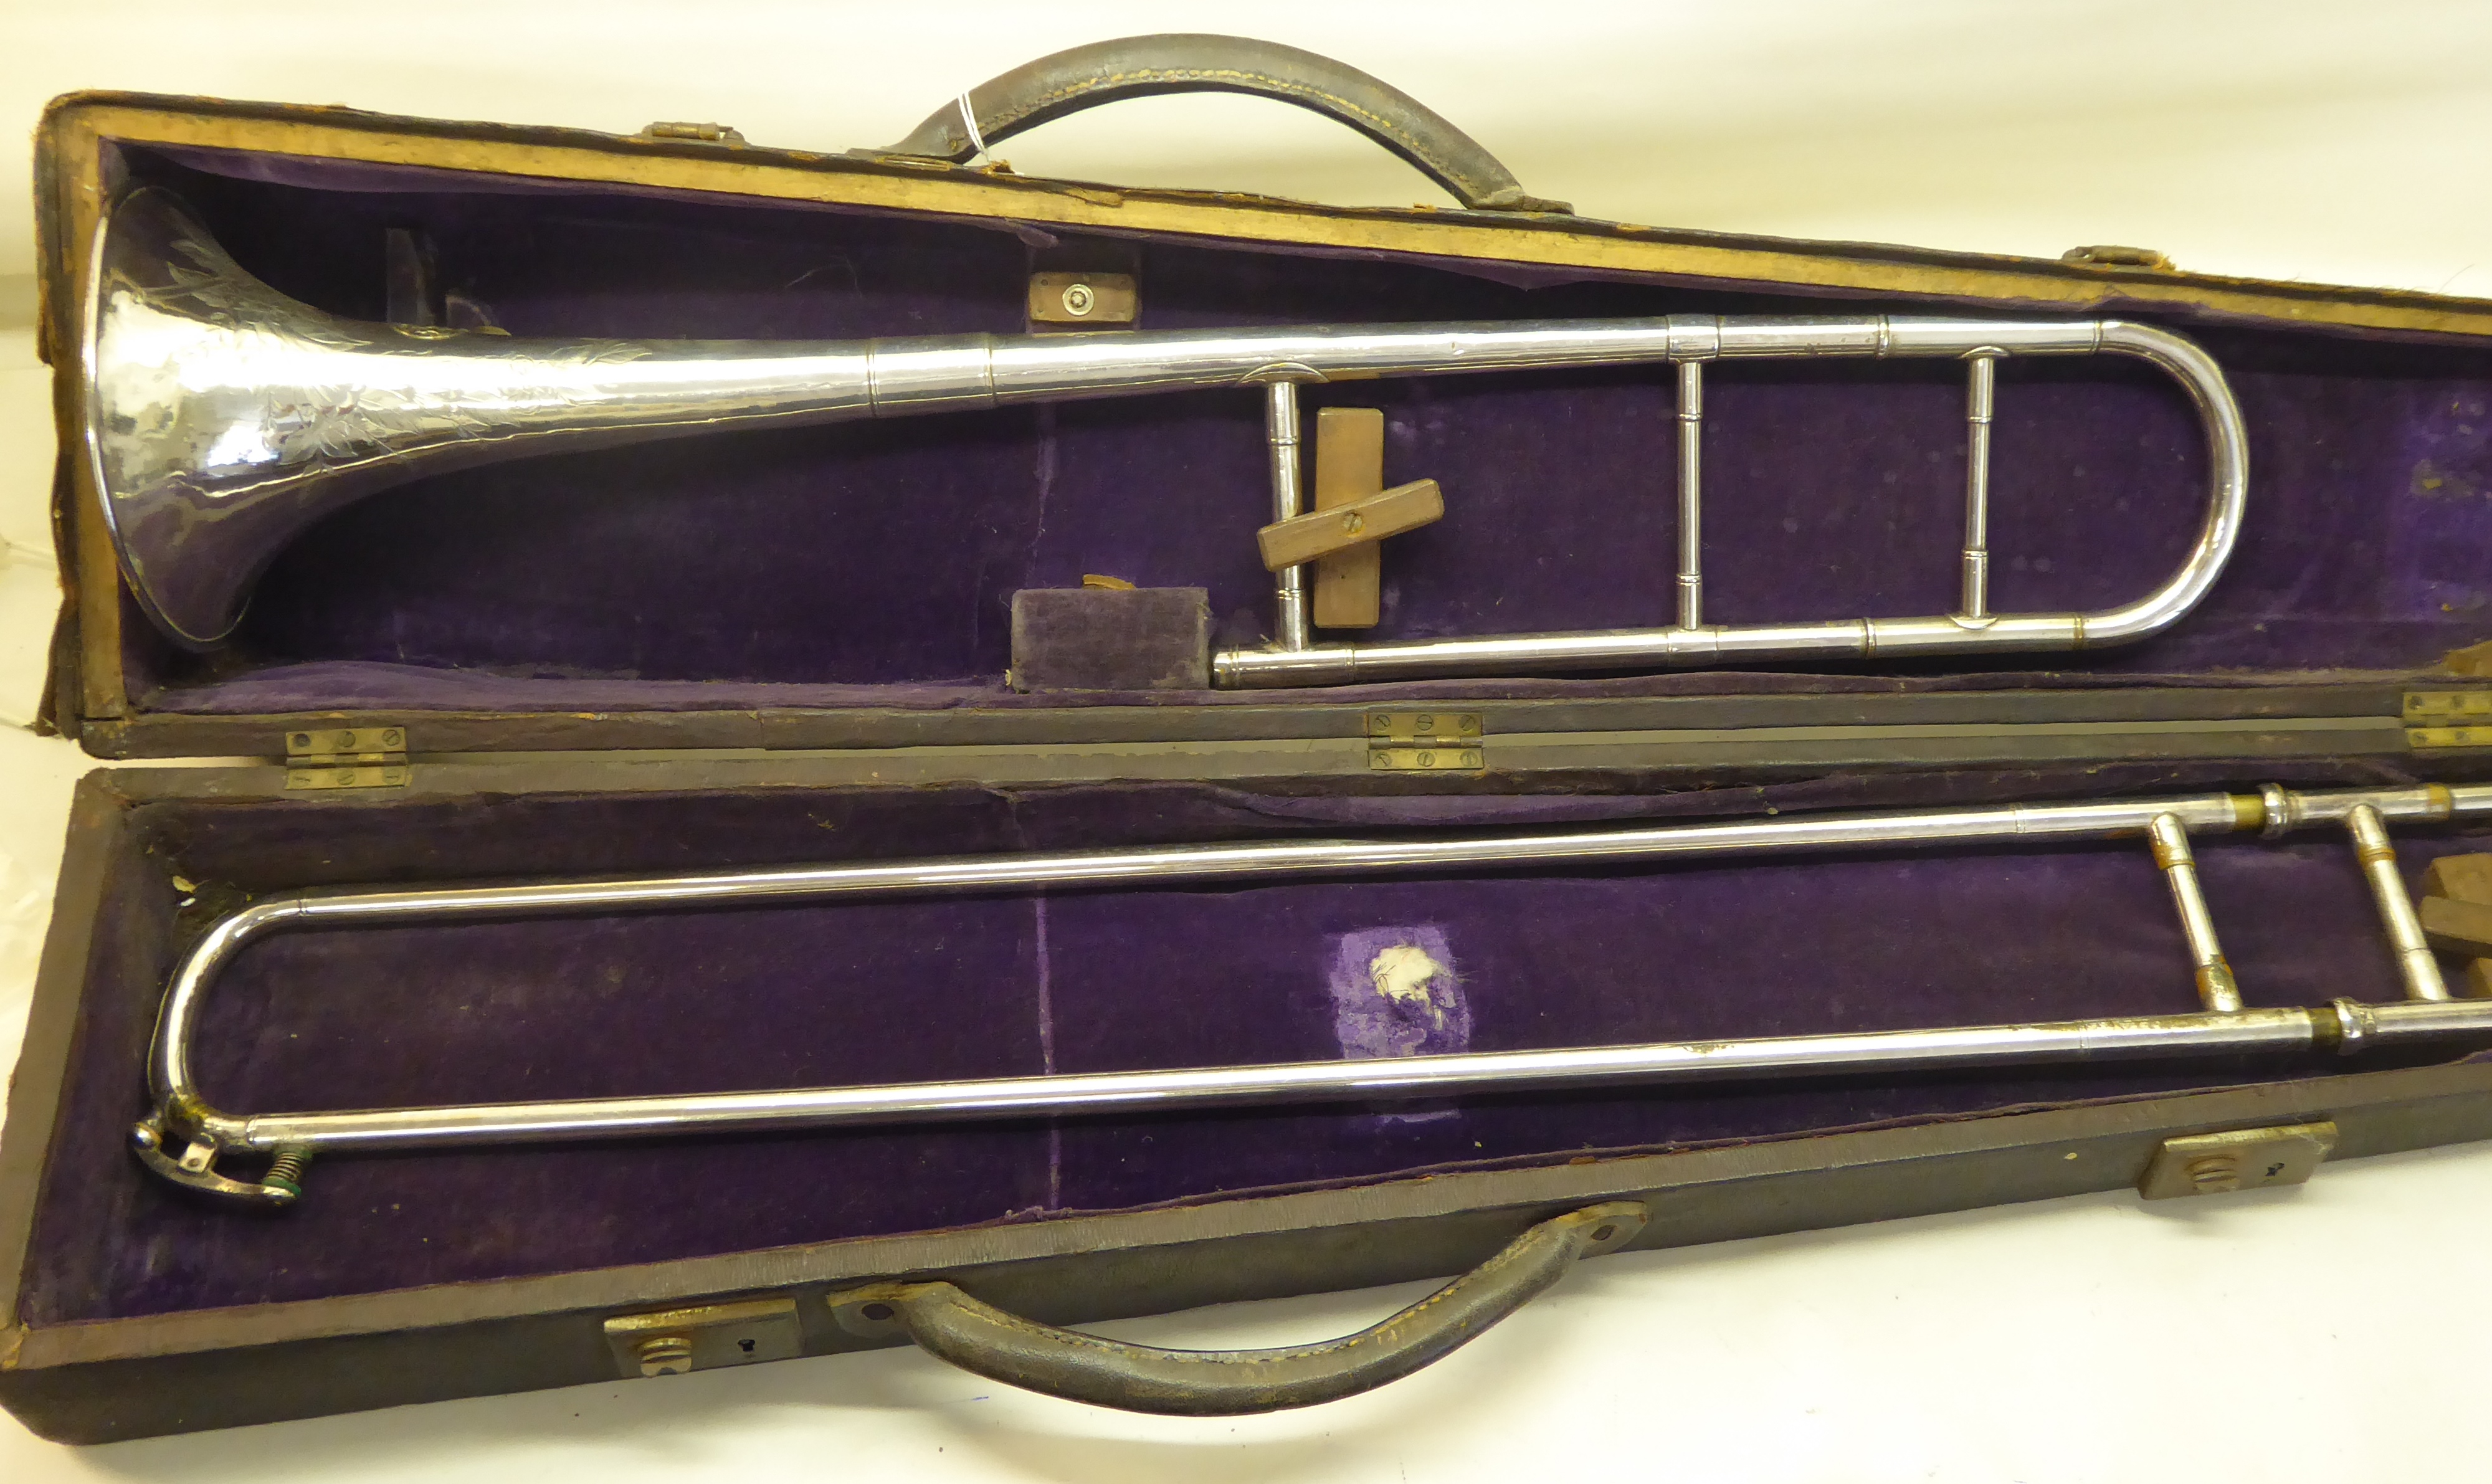 A silver plated Trombone with engraved decoration, cased.